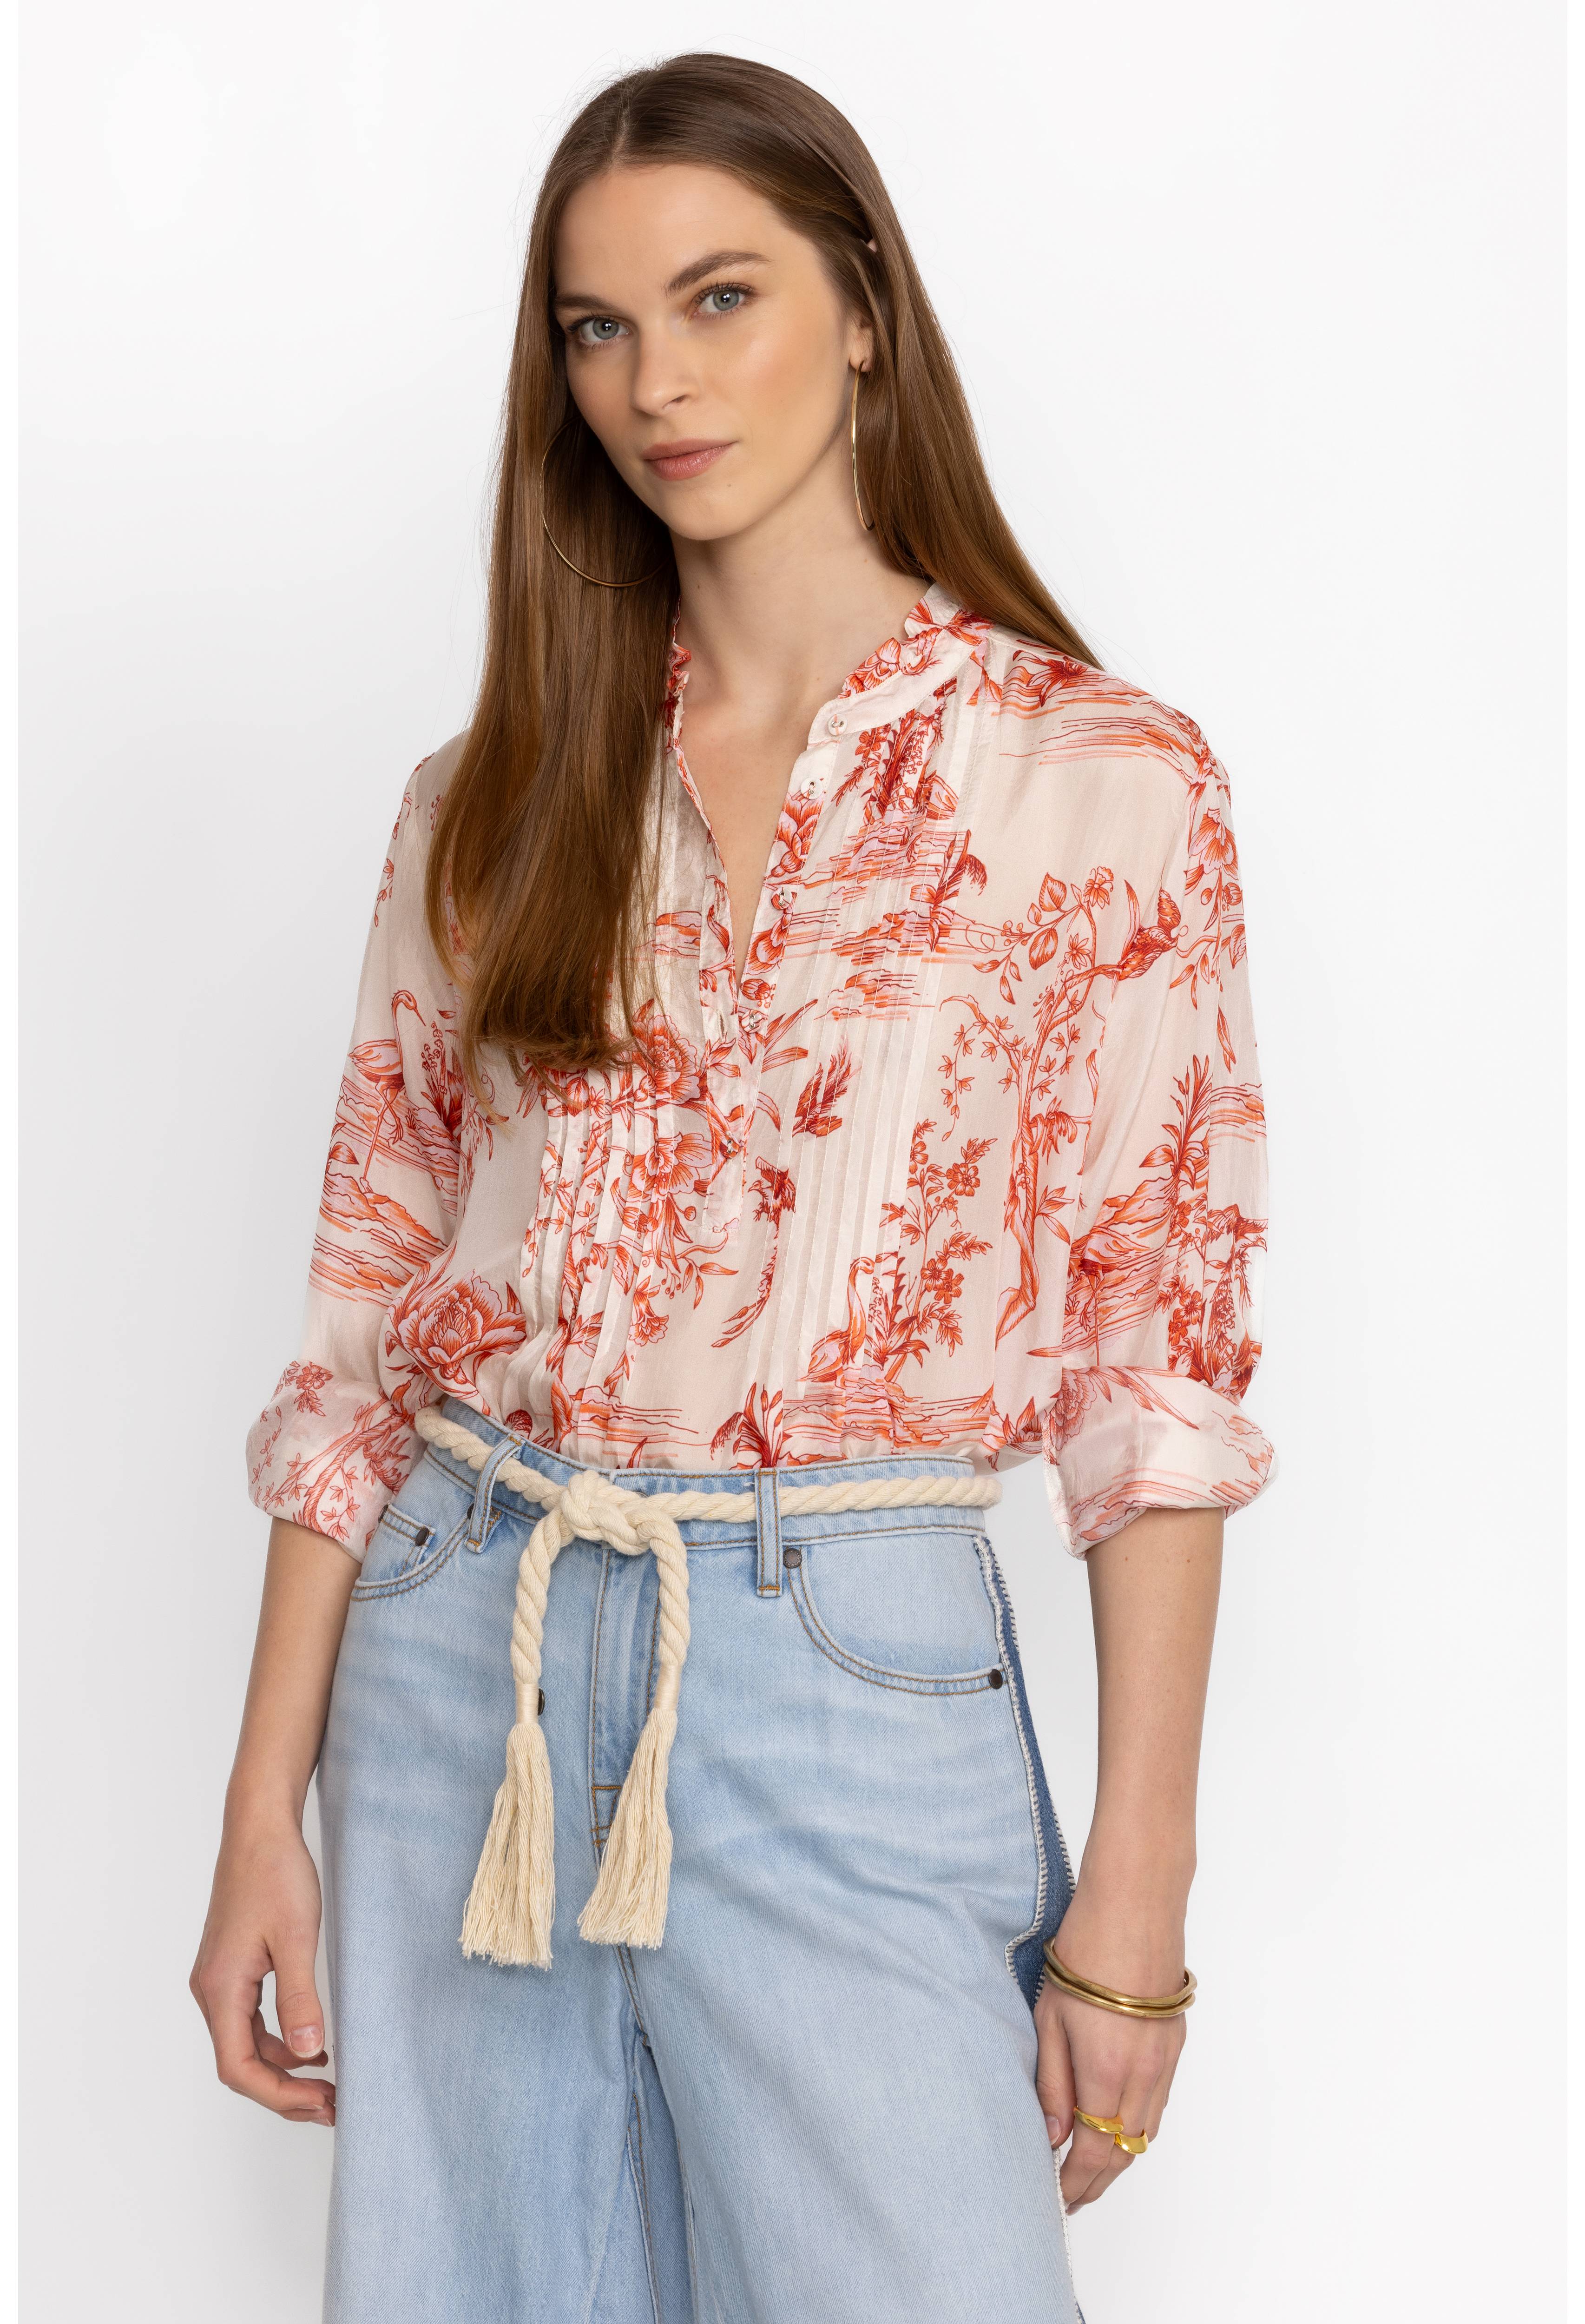 SPRING FIRE MALIA  BLOUSE, , large image number 1